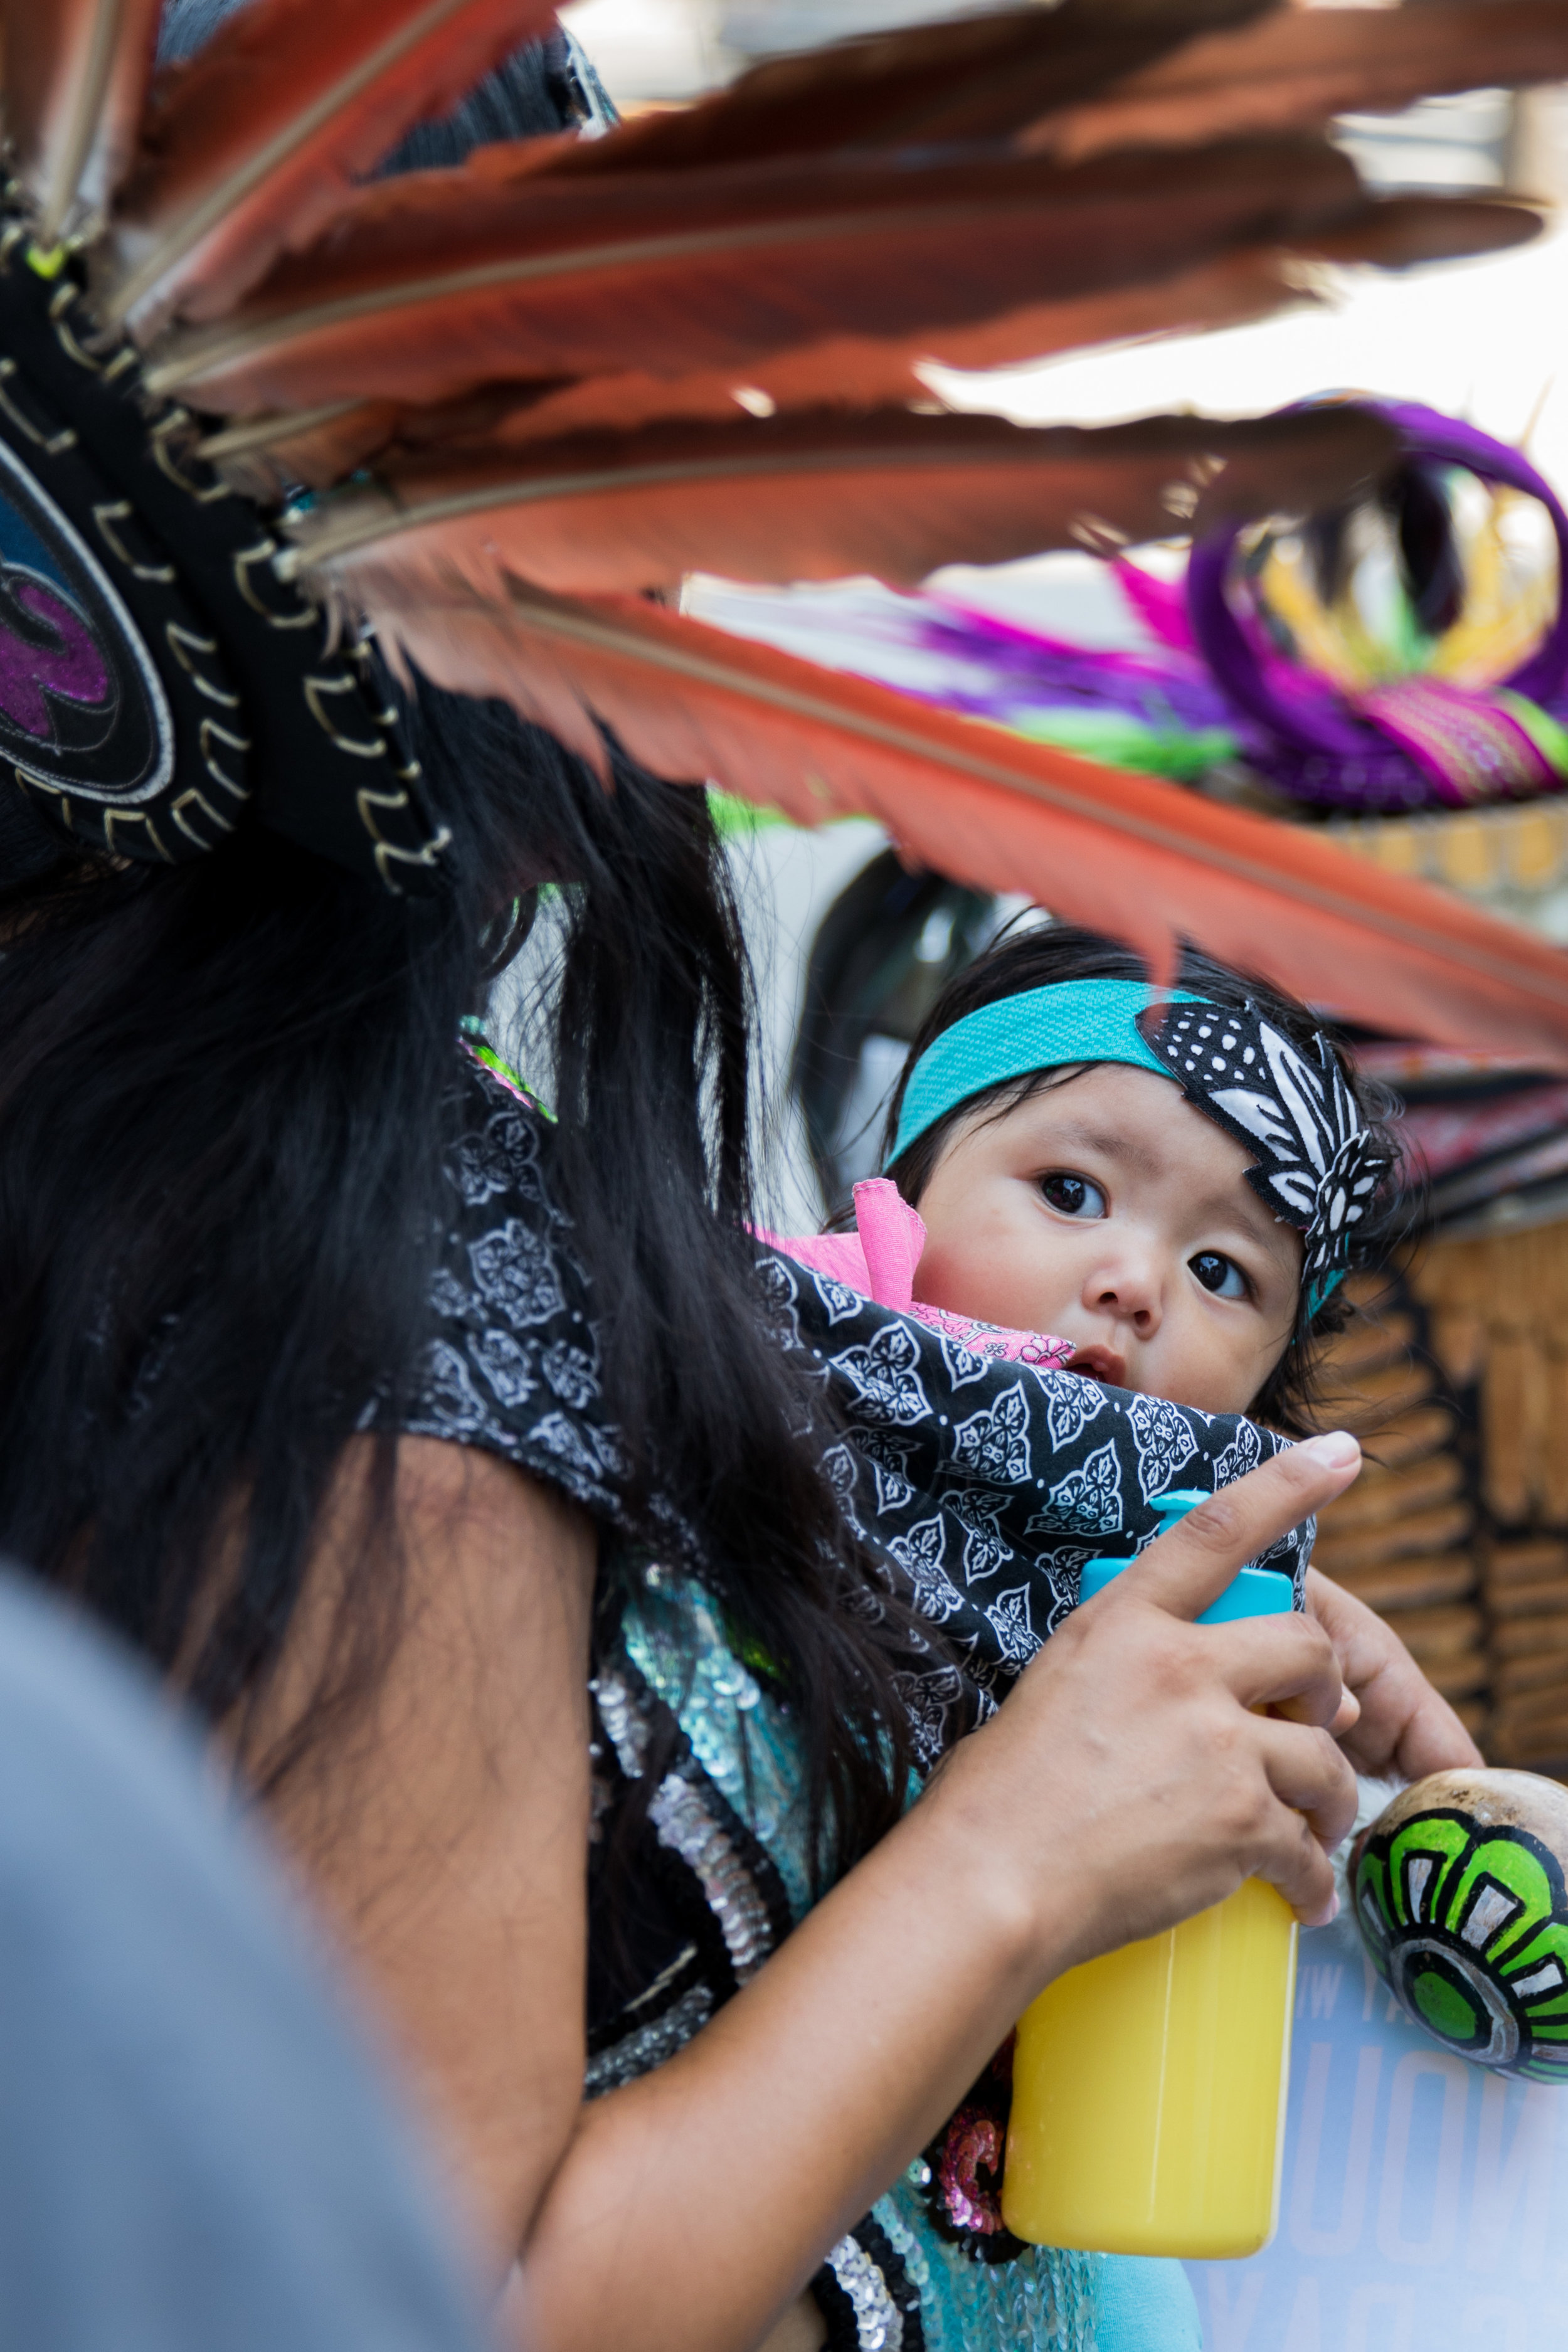  Lilia Herrera (left) takes a break to feed her daughter Xochipilli Herrera (right) at Los Angeles City Hall for the replacement of Columbus Day with Indigenous Peoples Day which was successful on August 30, 2017 in Los Angeles, California (Photo By: